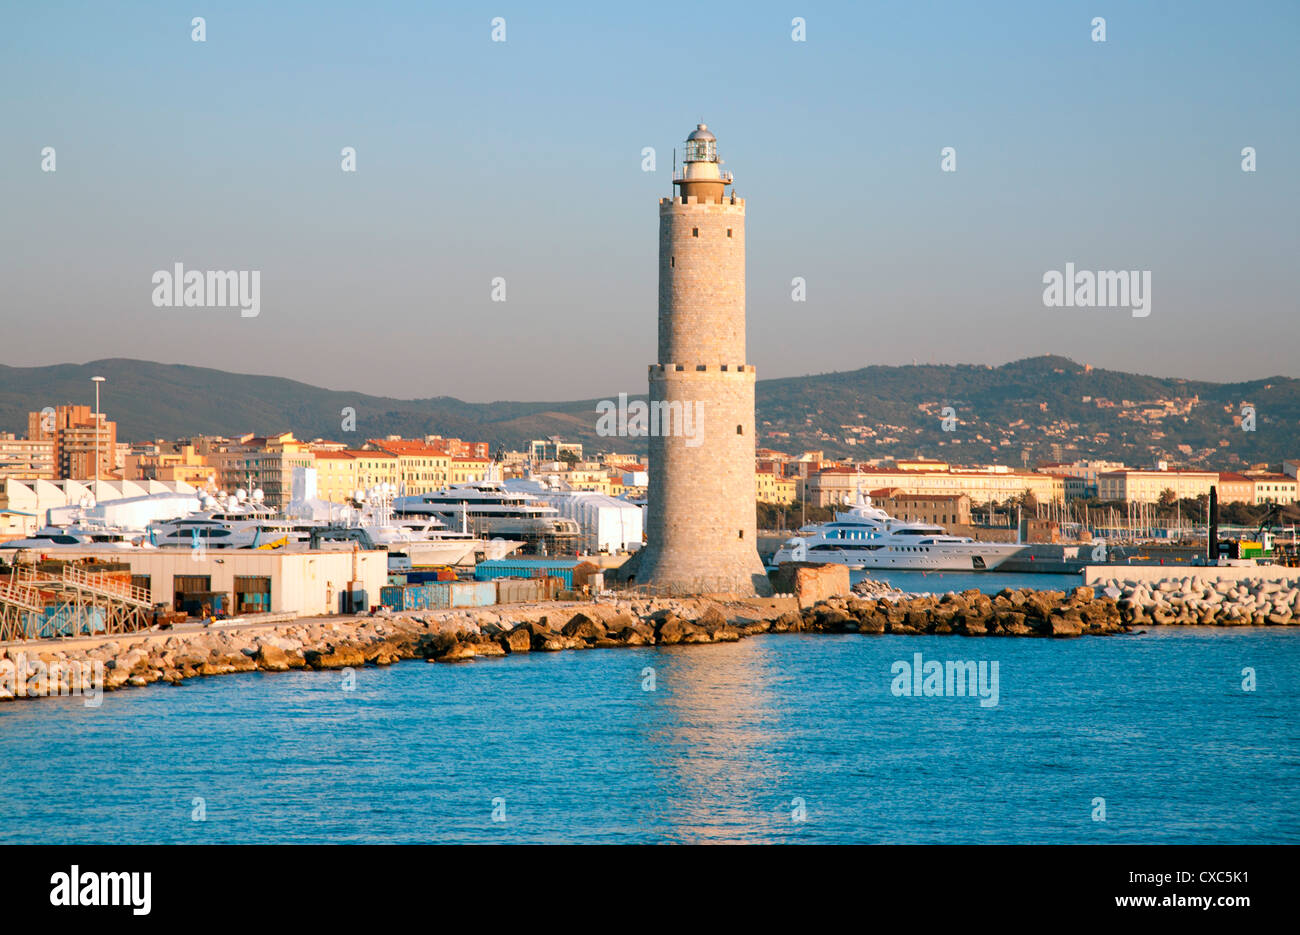 View of shipyard showing the Lighthouse of Livorno, Livorno, Tuscany, Italy, Europe Stock Photo